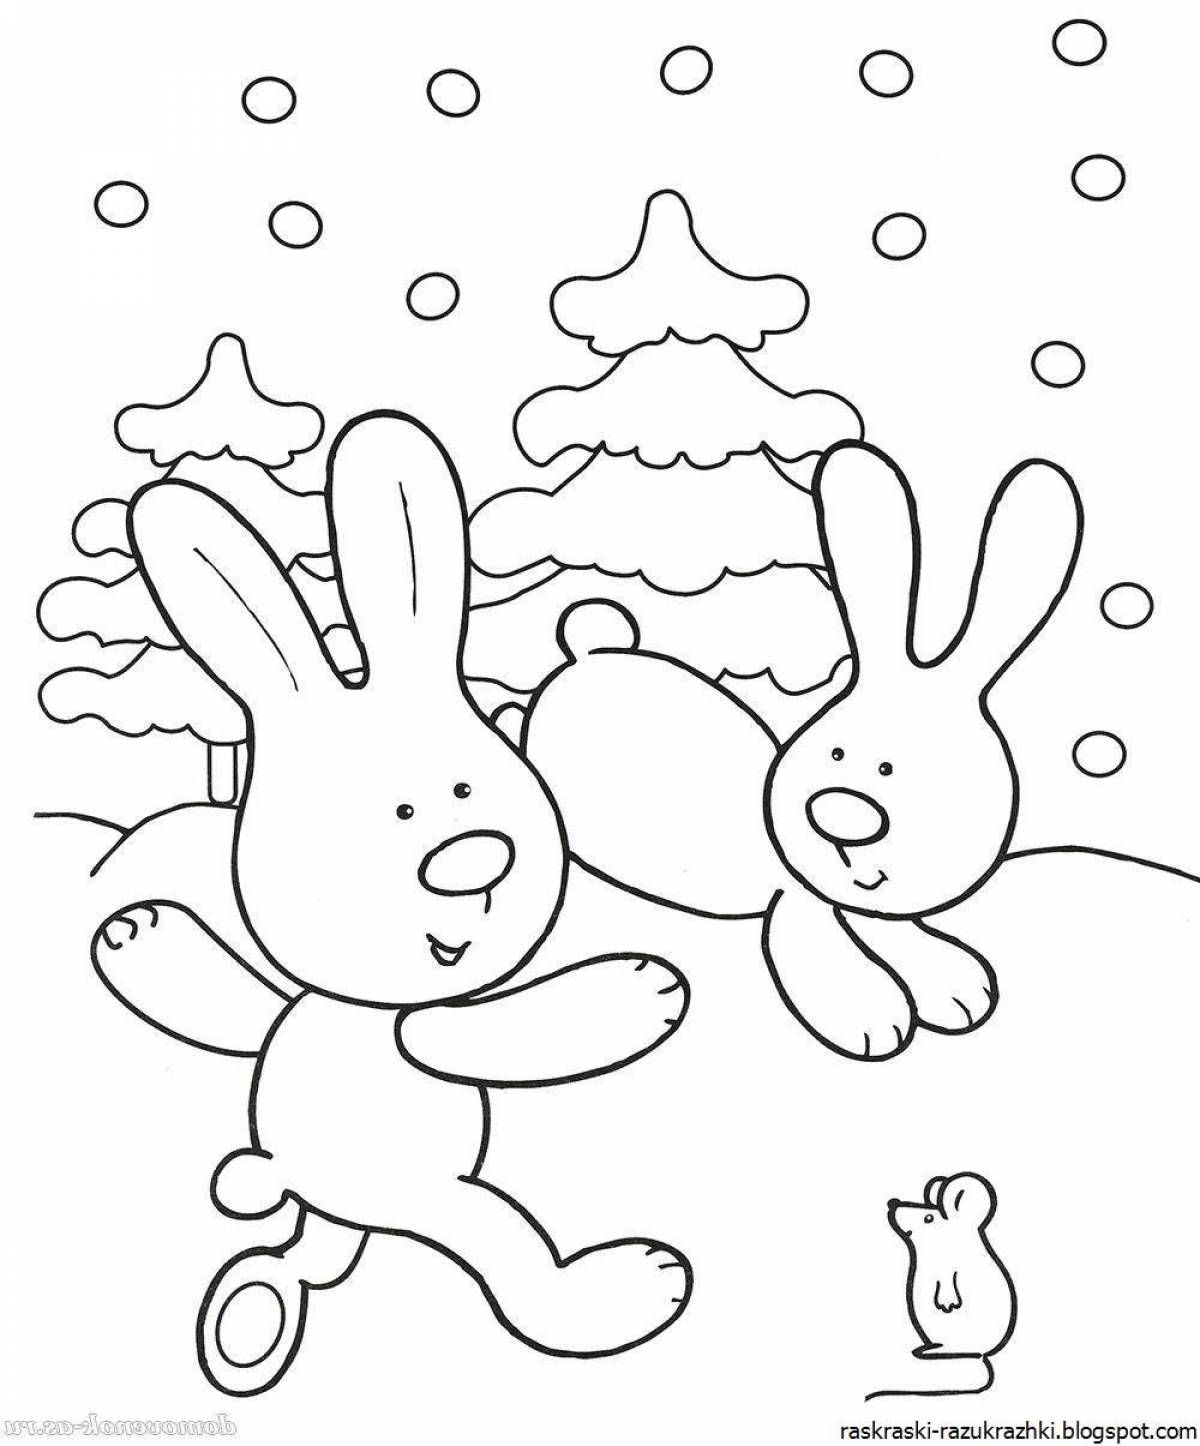 Violent hare coloring book for children 3-4 years old